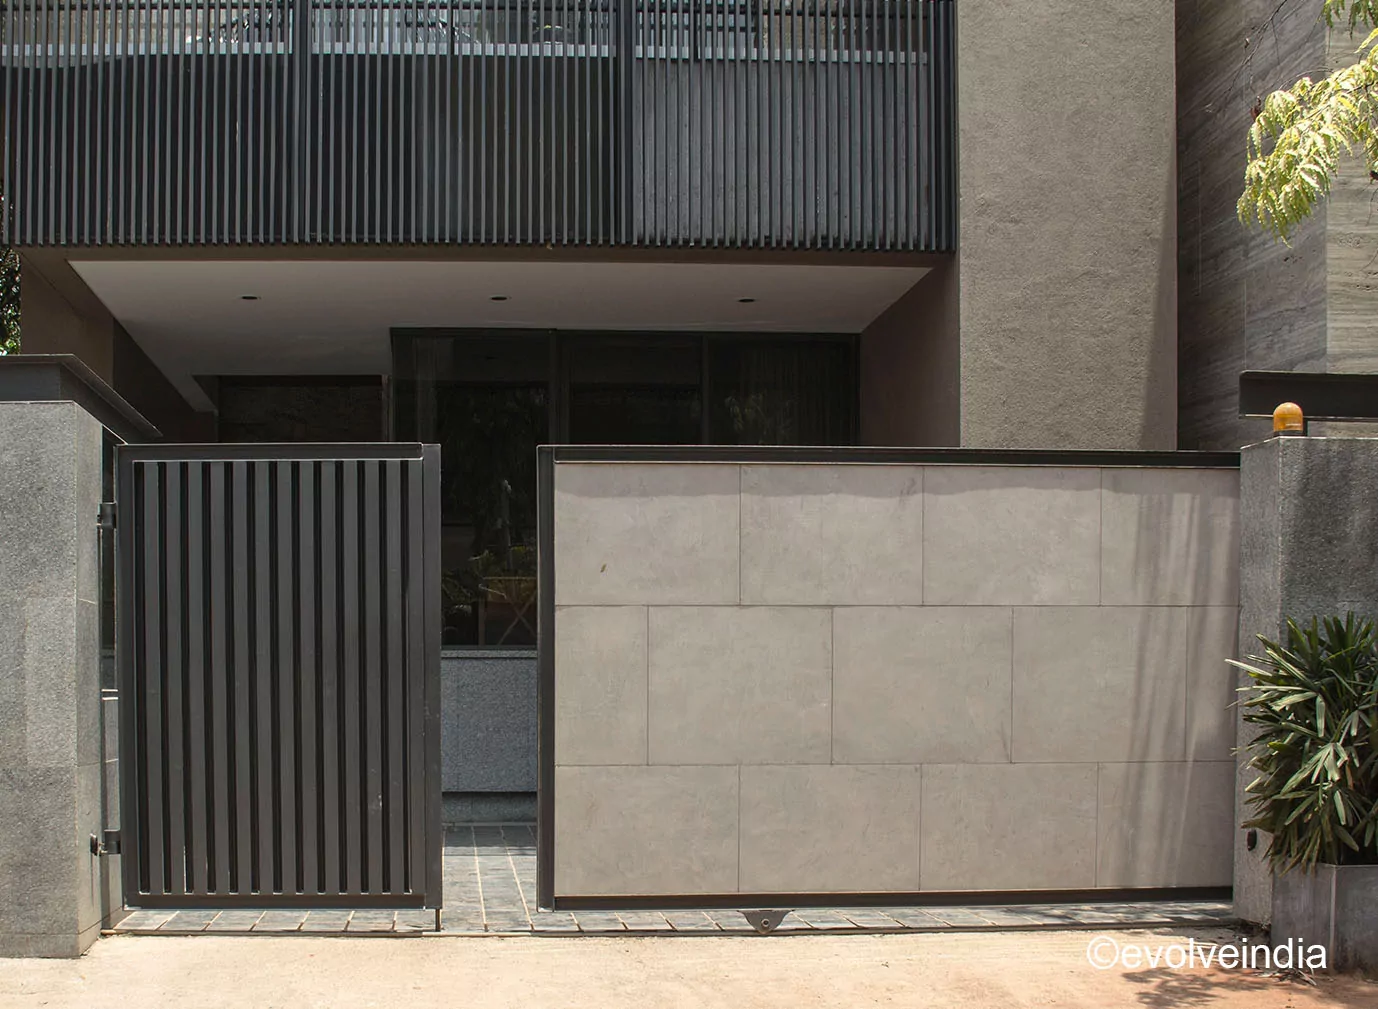 Exterior Wall Texture Design of A Residential Space done by Evolve India using decorative concrete finishes